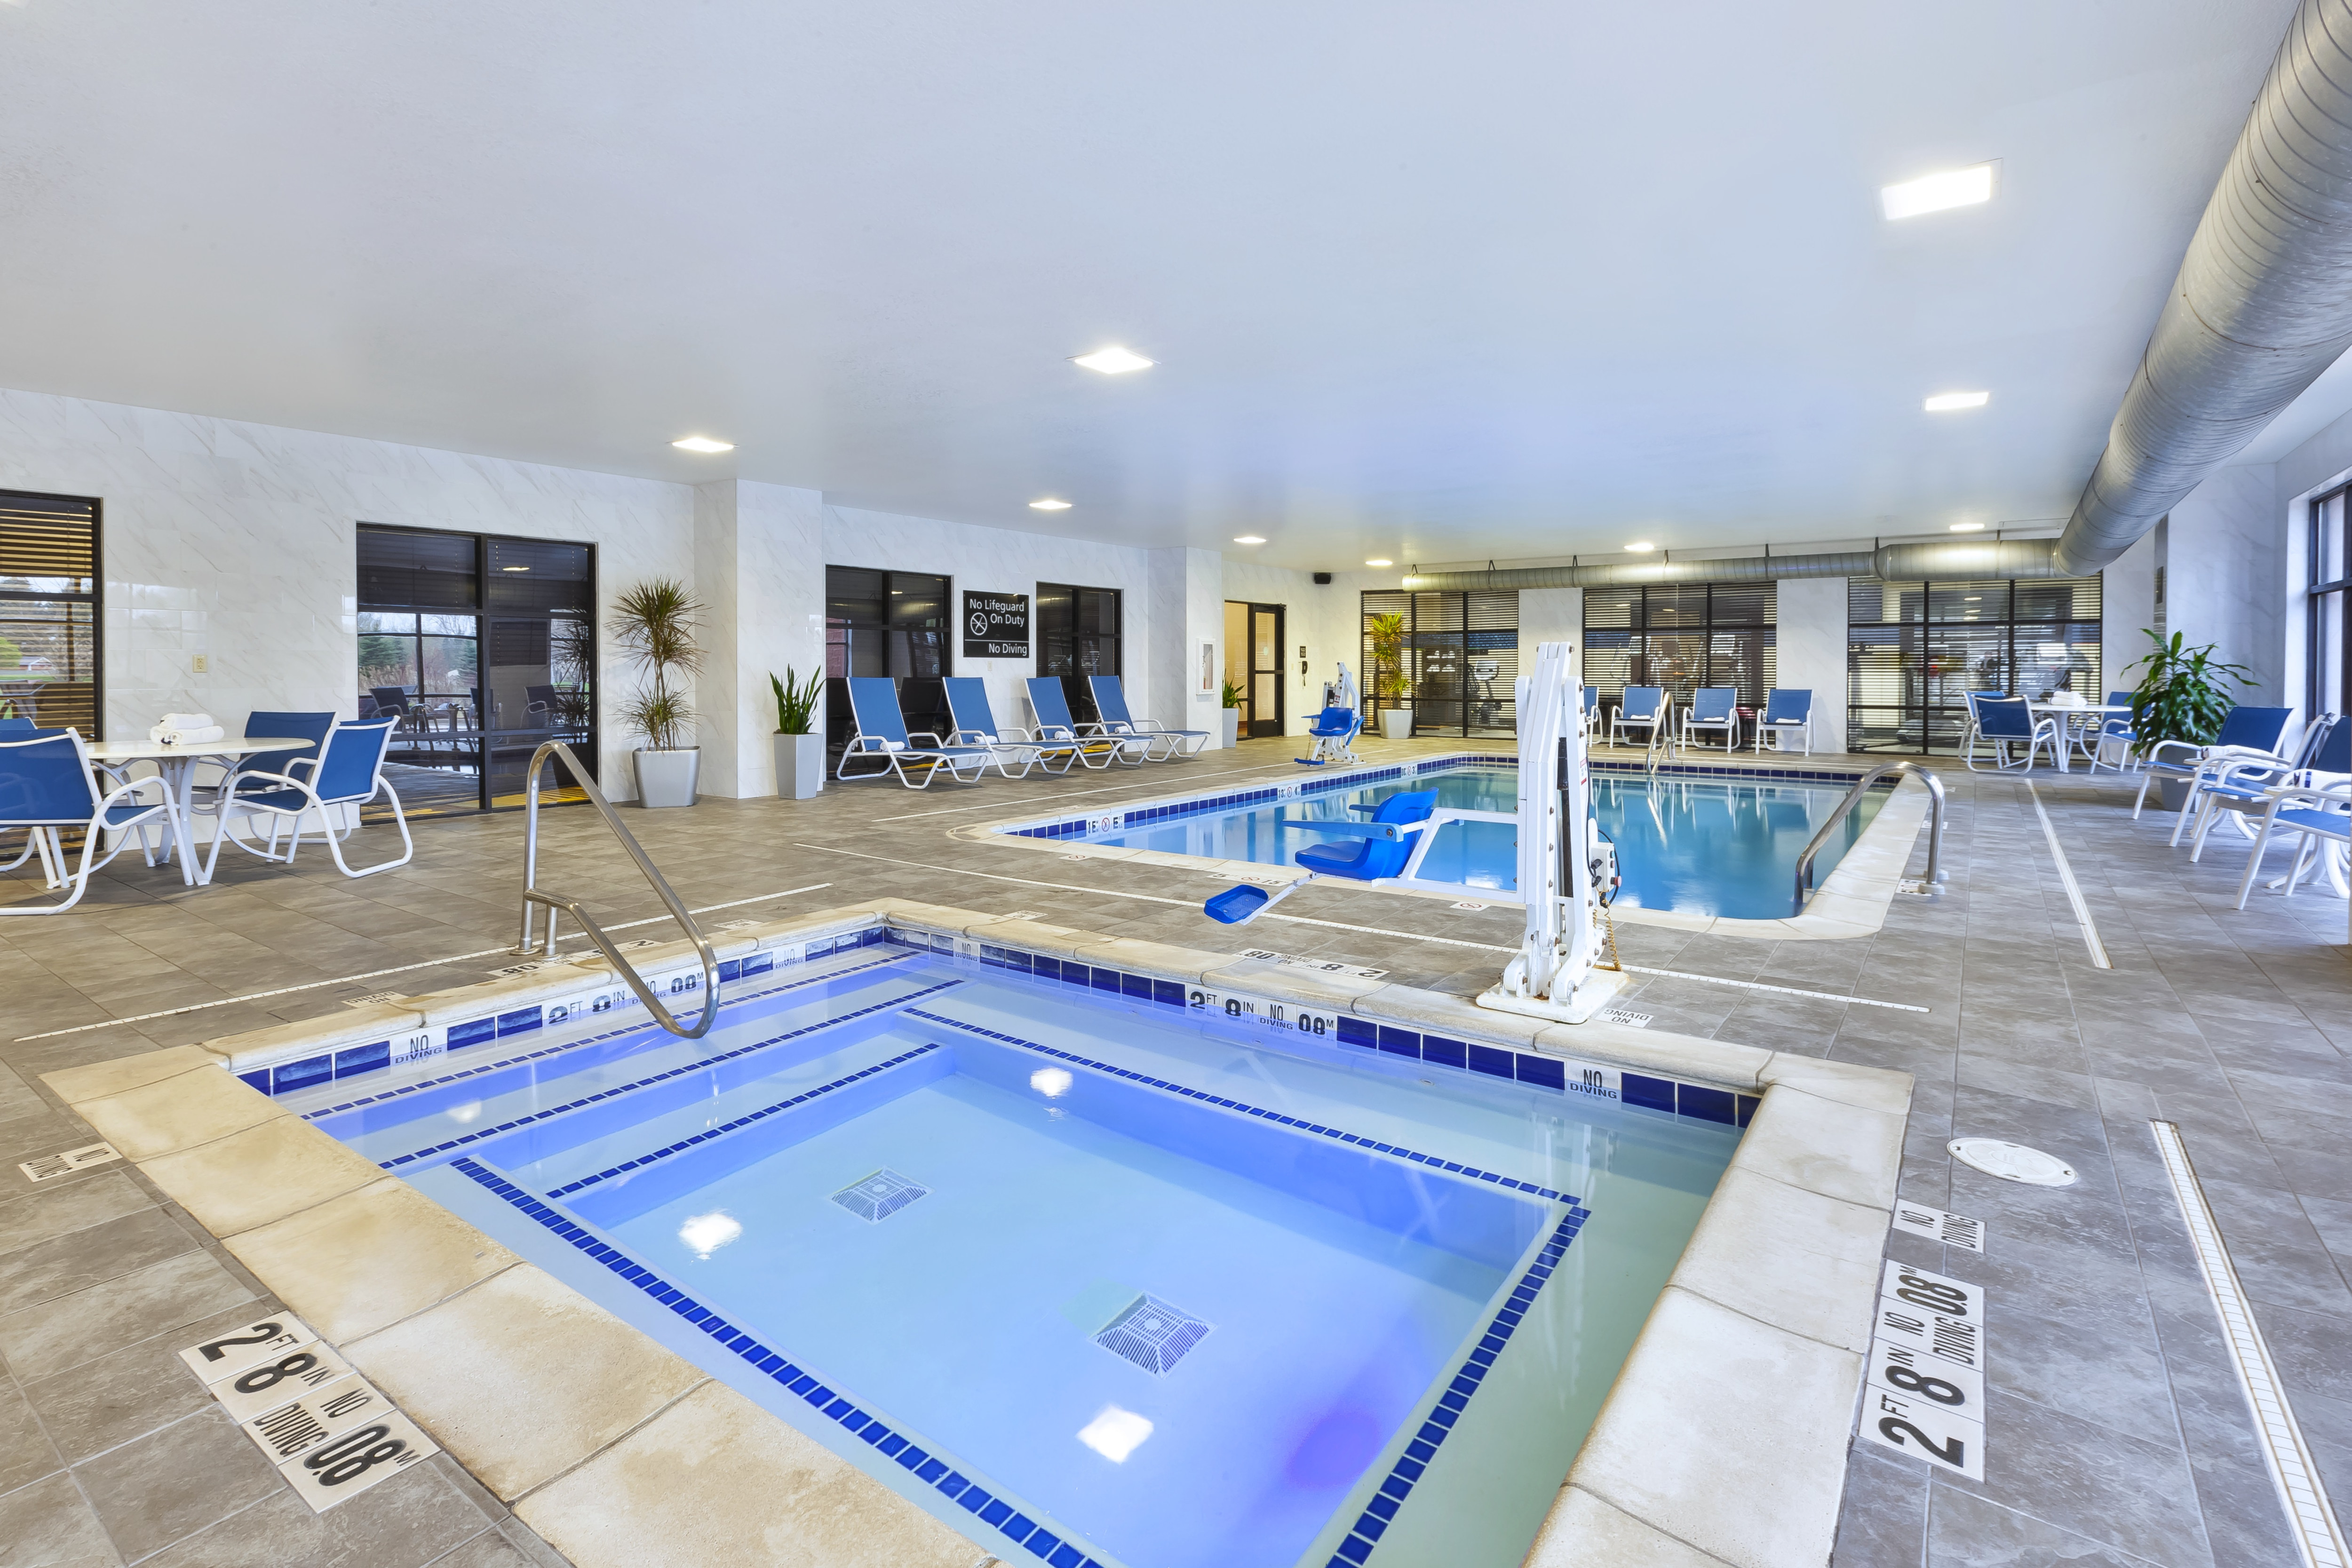 Whirlpool and Pool Area